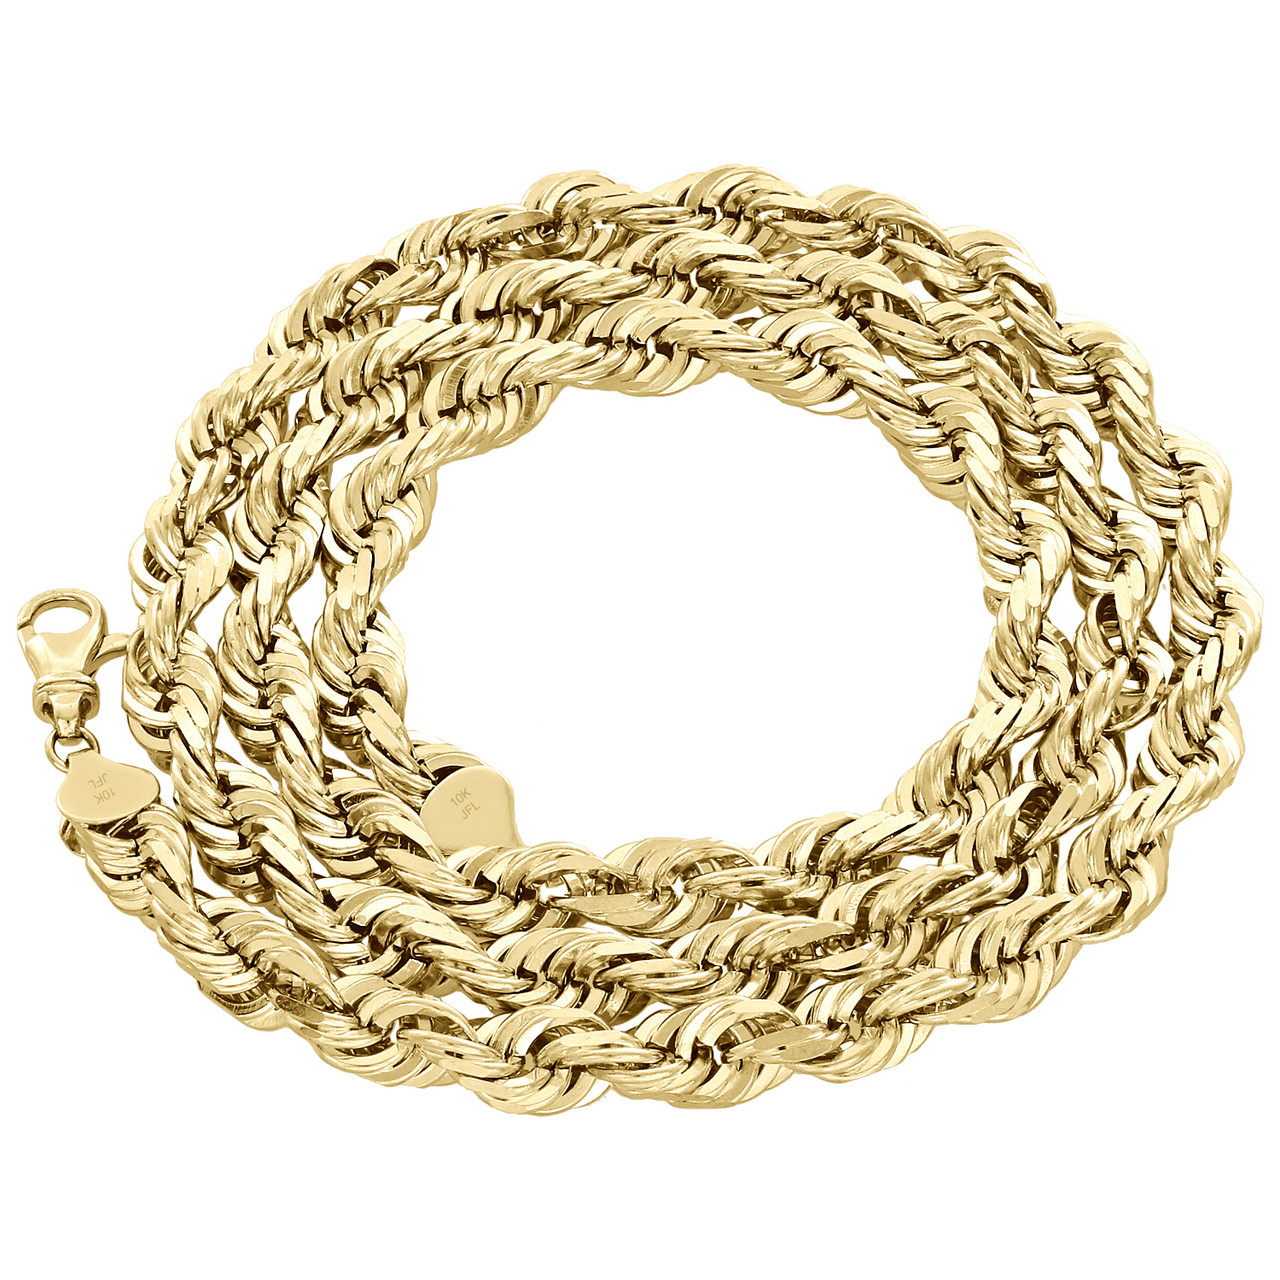 Rolo Chain with Diamond Cut Accents, Light Gold-tone Finish - 3/8 inch  (9mm) Wide Luxury Chain Strap - Handle to Crossbody Lengths